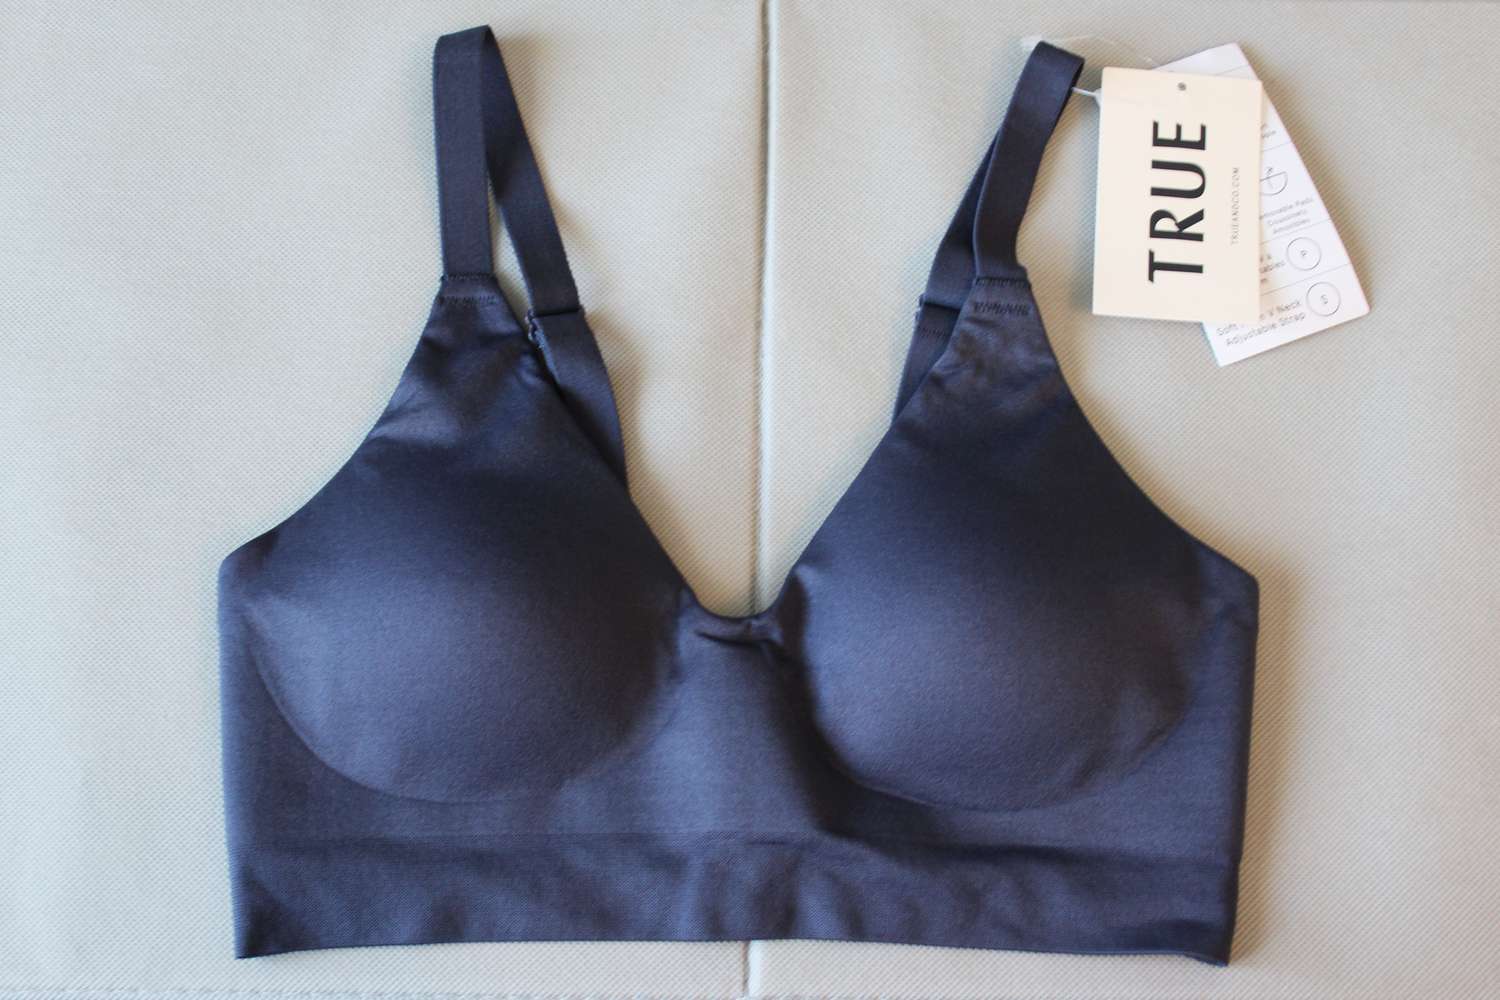 True & Co. Soft Form V Neck Adjustable Strap Bra with tags attached